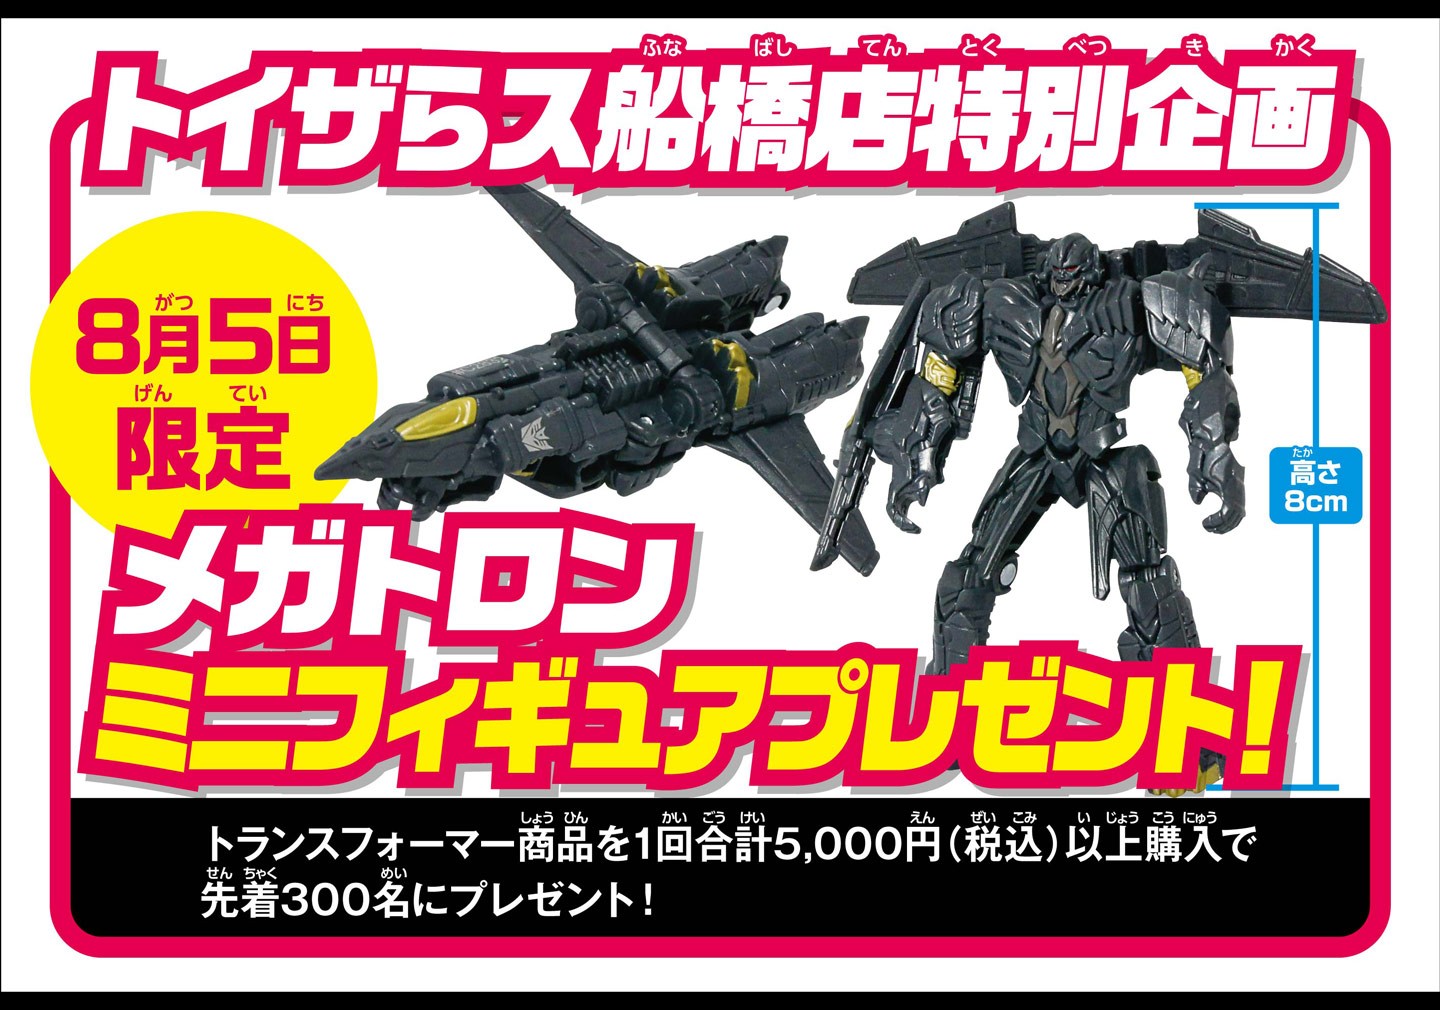 Transformers News: More Details on Takara Tomy Transformers FES 2017, featuring Legion Megatron Exclusive